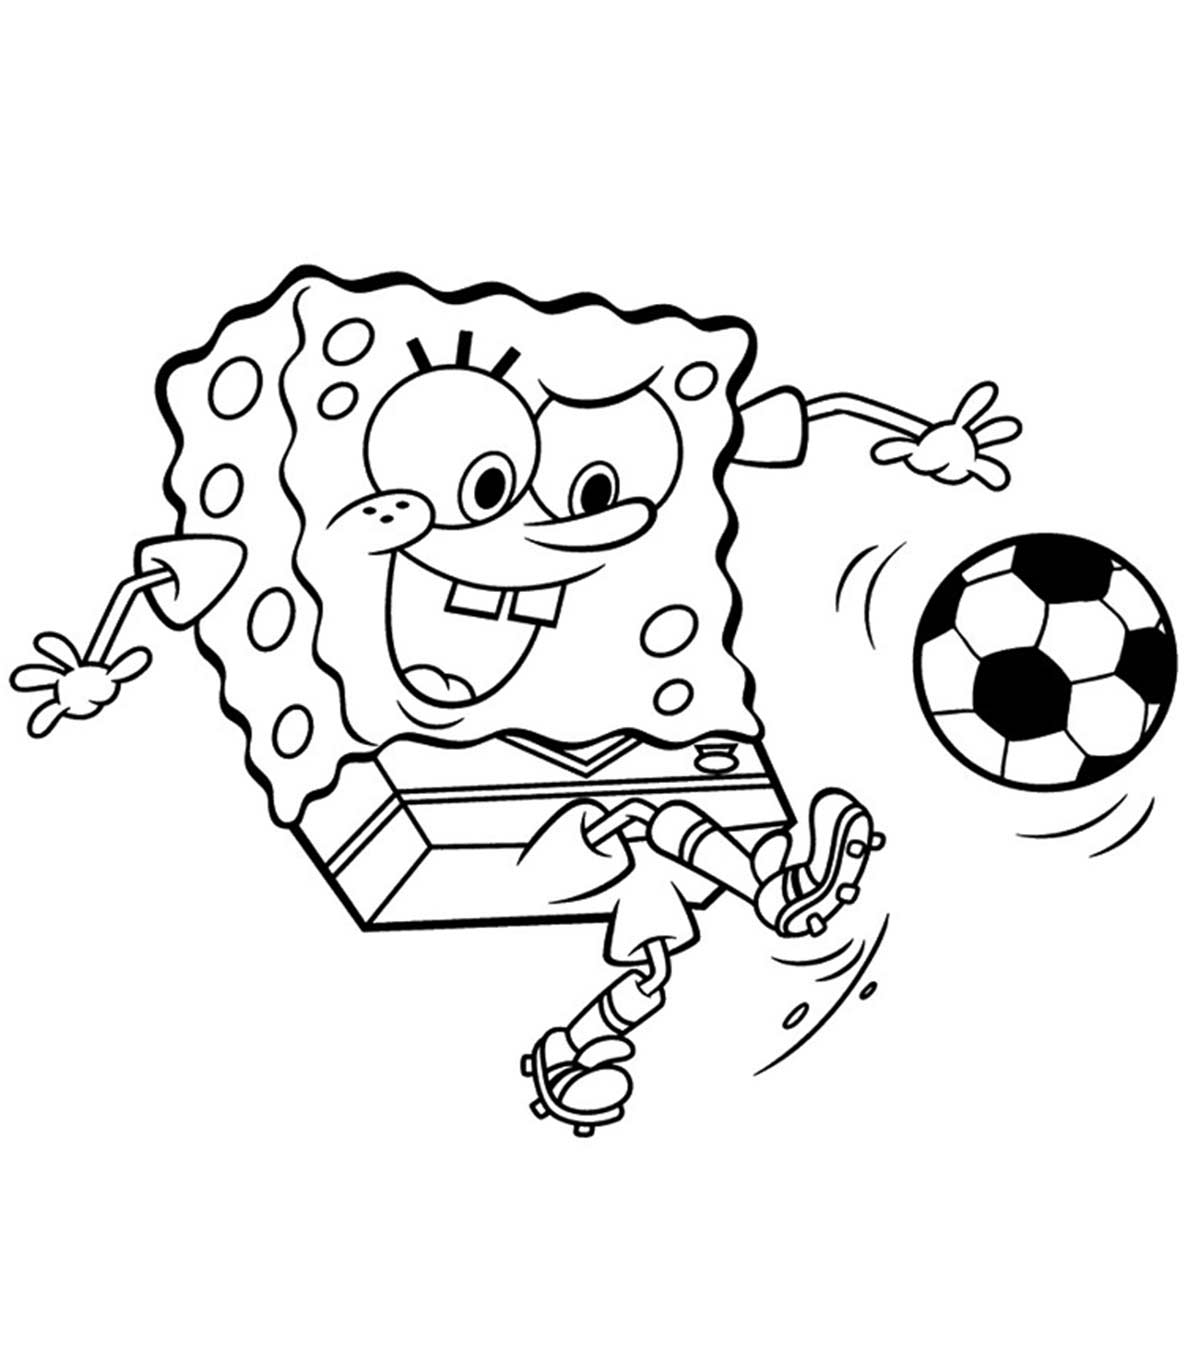 20 Best Soccer Coloring Pages For Your Little Ones_image